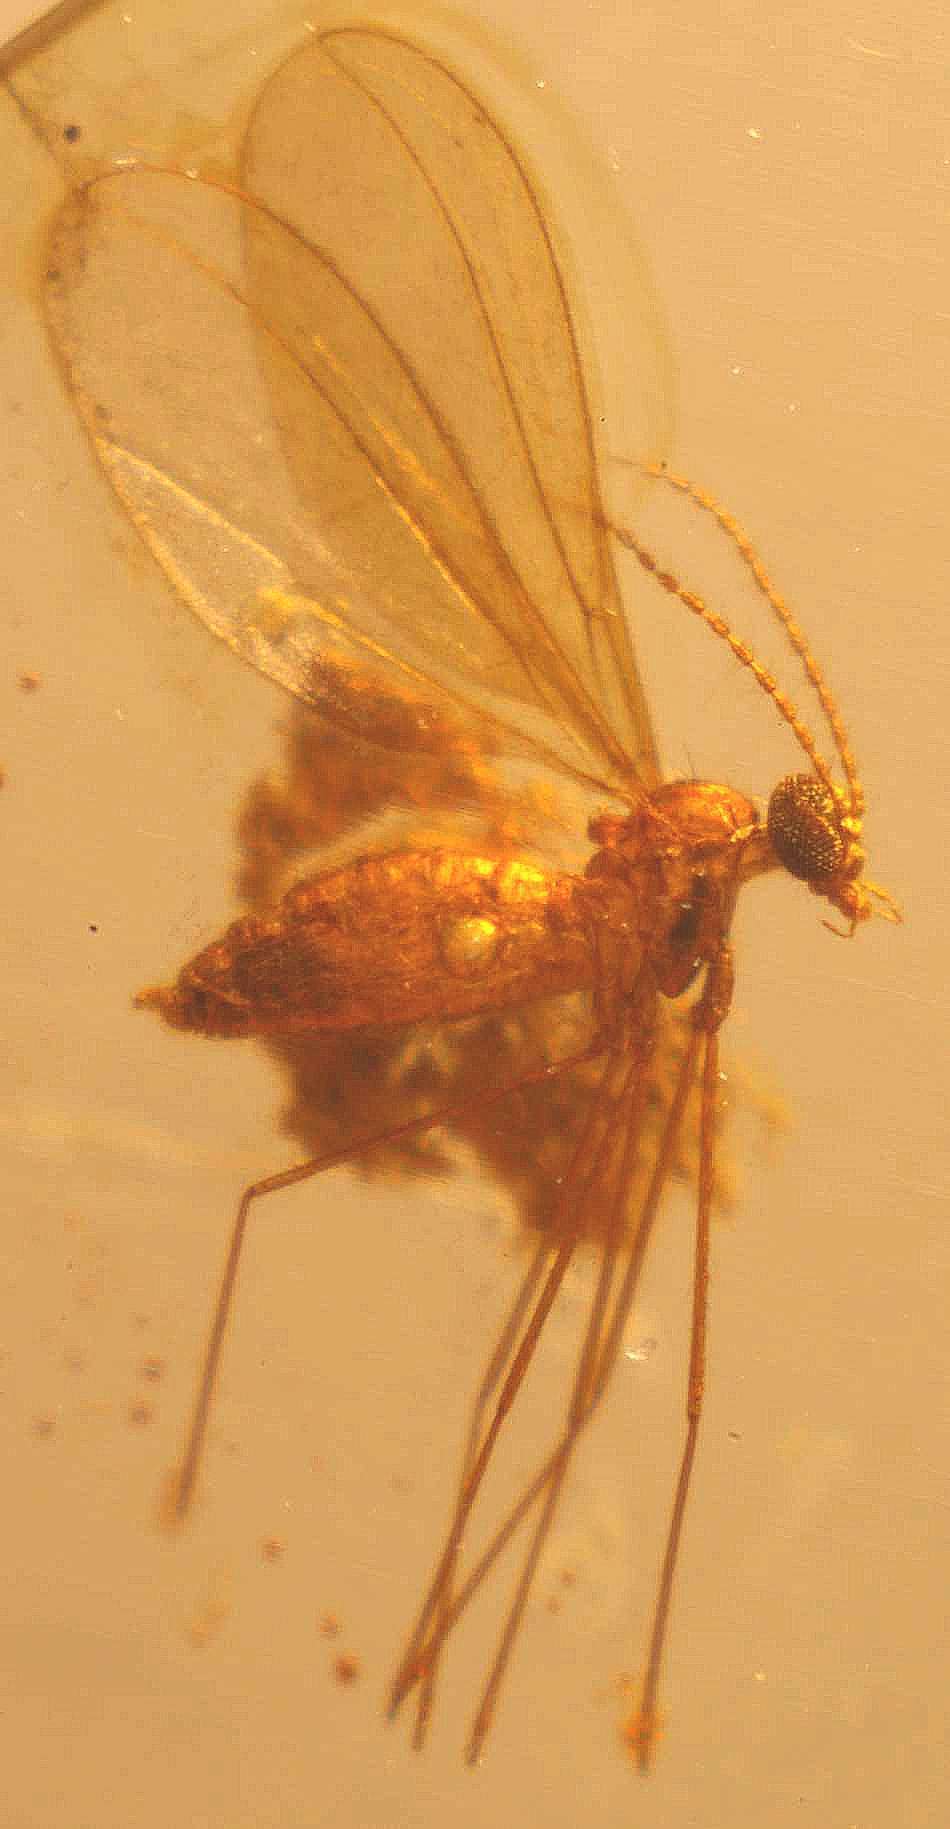 Fossil plant in amber